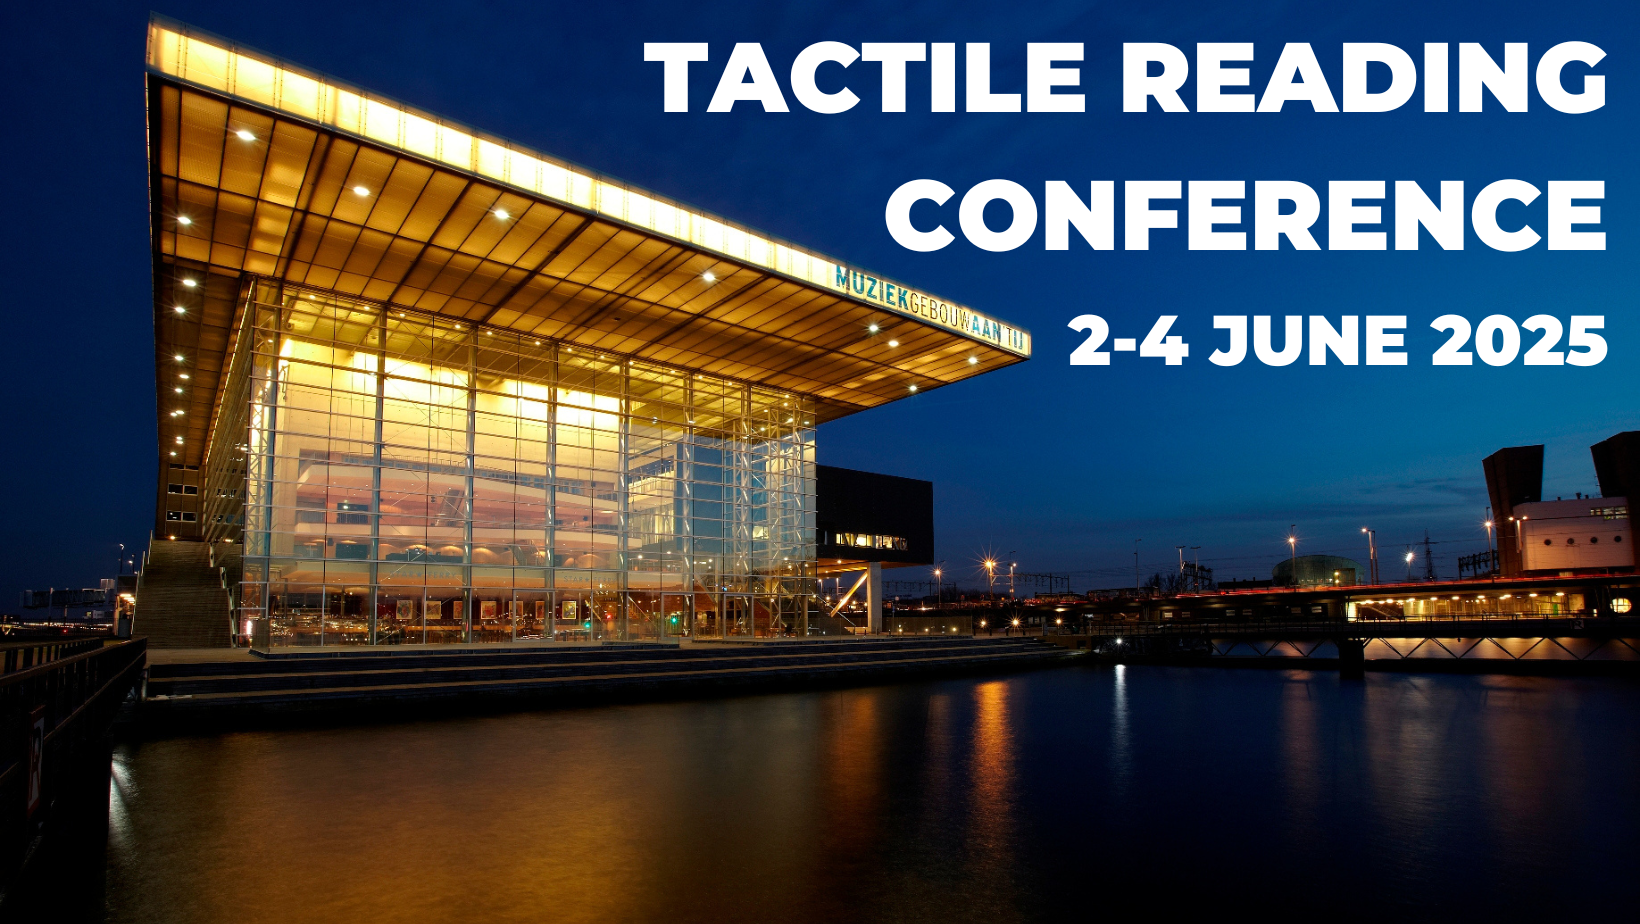 Tactile Reading Conference 2025